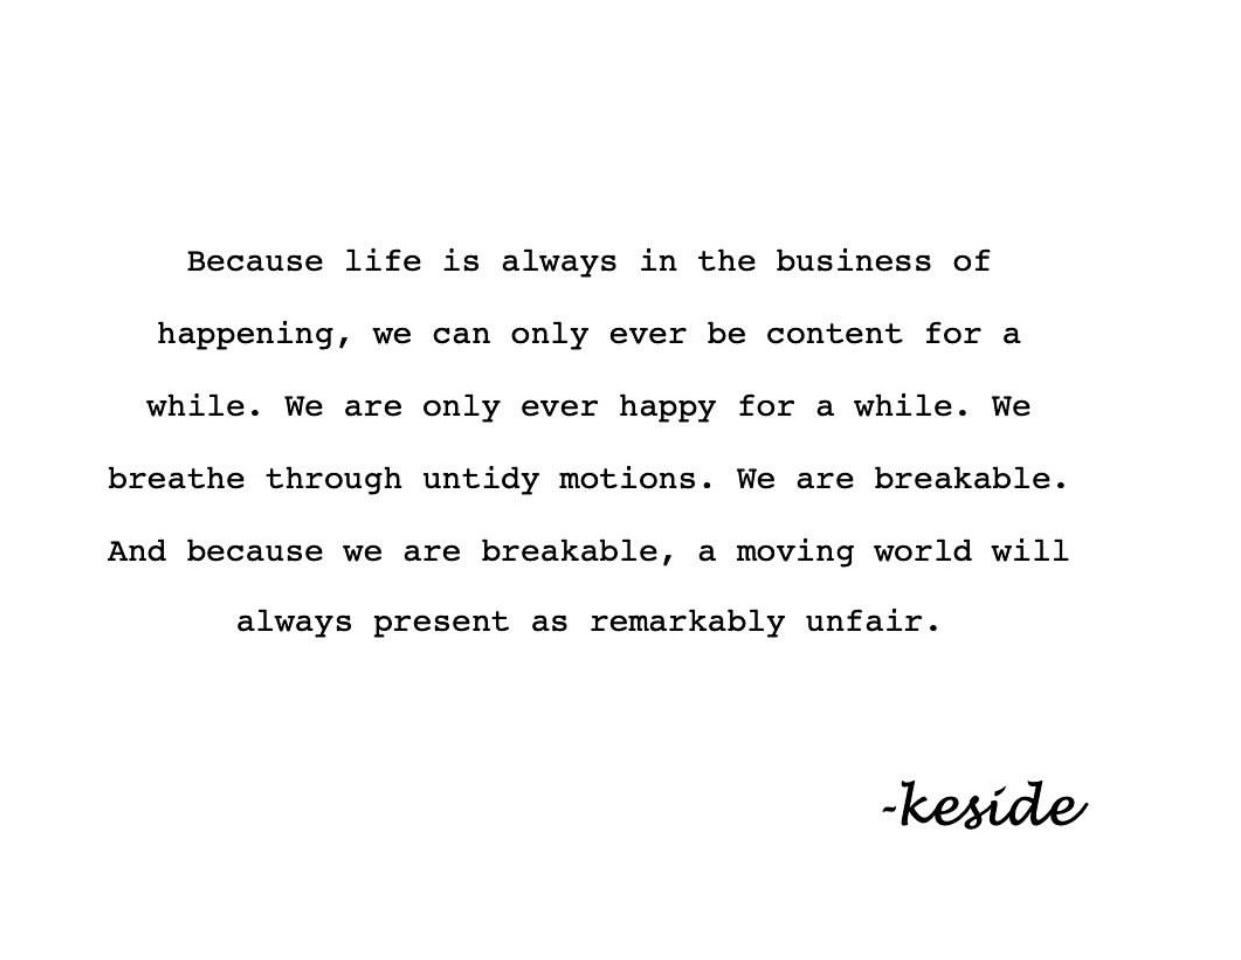 Because life is always in the business of happening, we can only ever be content for a while. We are only ever happy for a while. We breathe through untidy motions. We are breakable. And because we are breakable, a moving world will always present as remarkably unfair. -keside